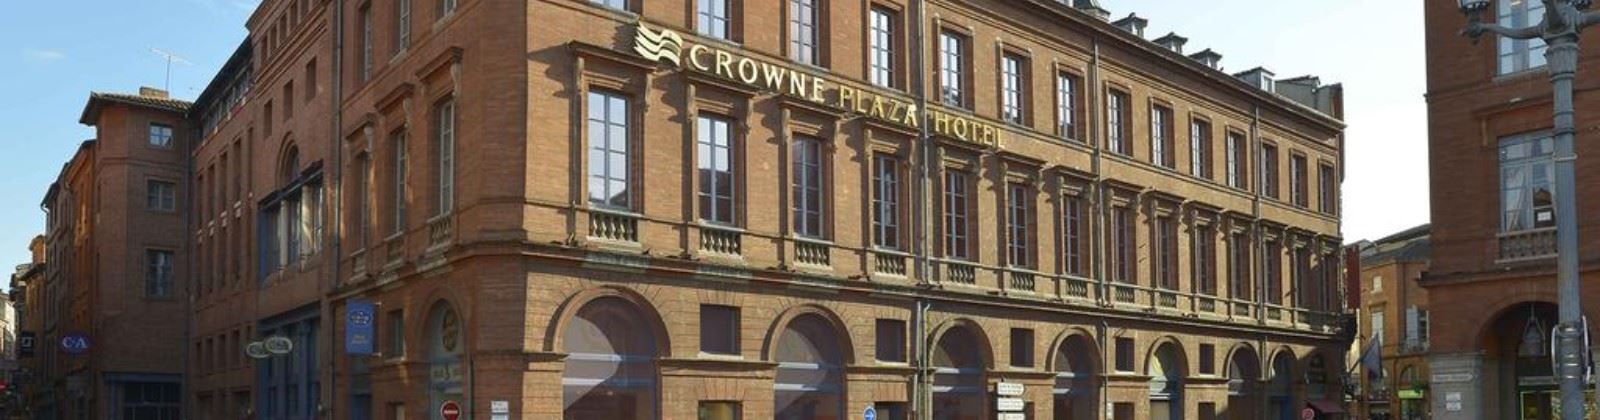 OLEVENE Image - crowne-plaza-toulouse-olevene-hotel-restaurant-conference-meeting-booking-